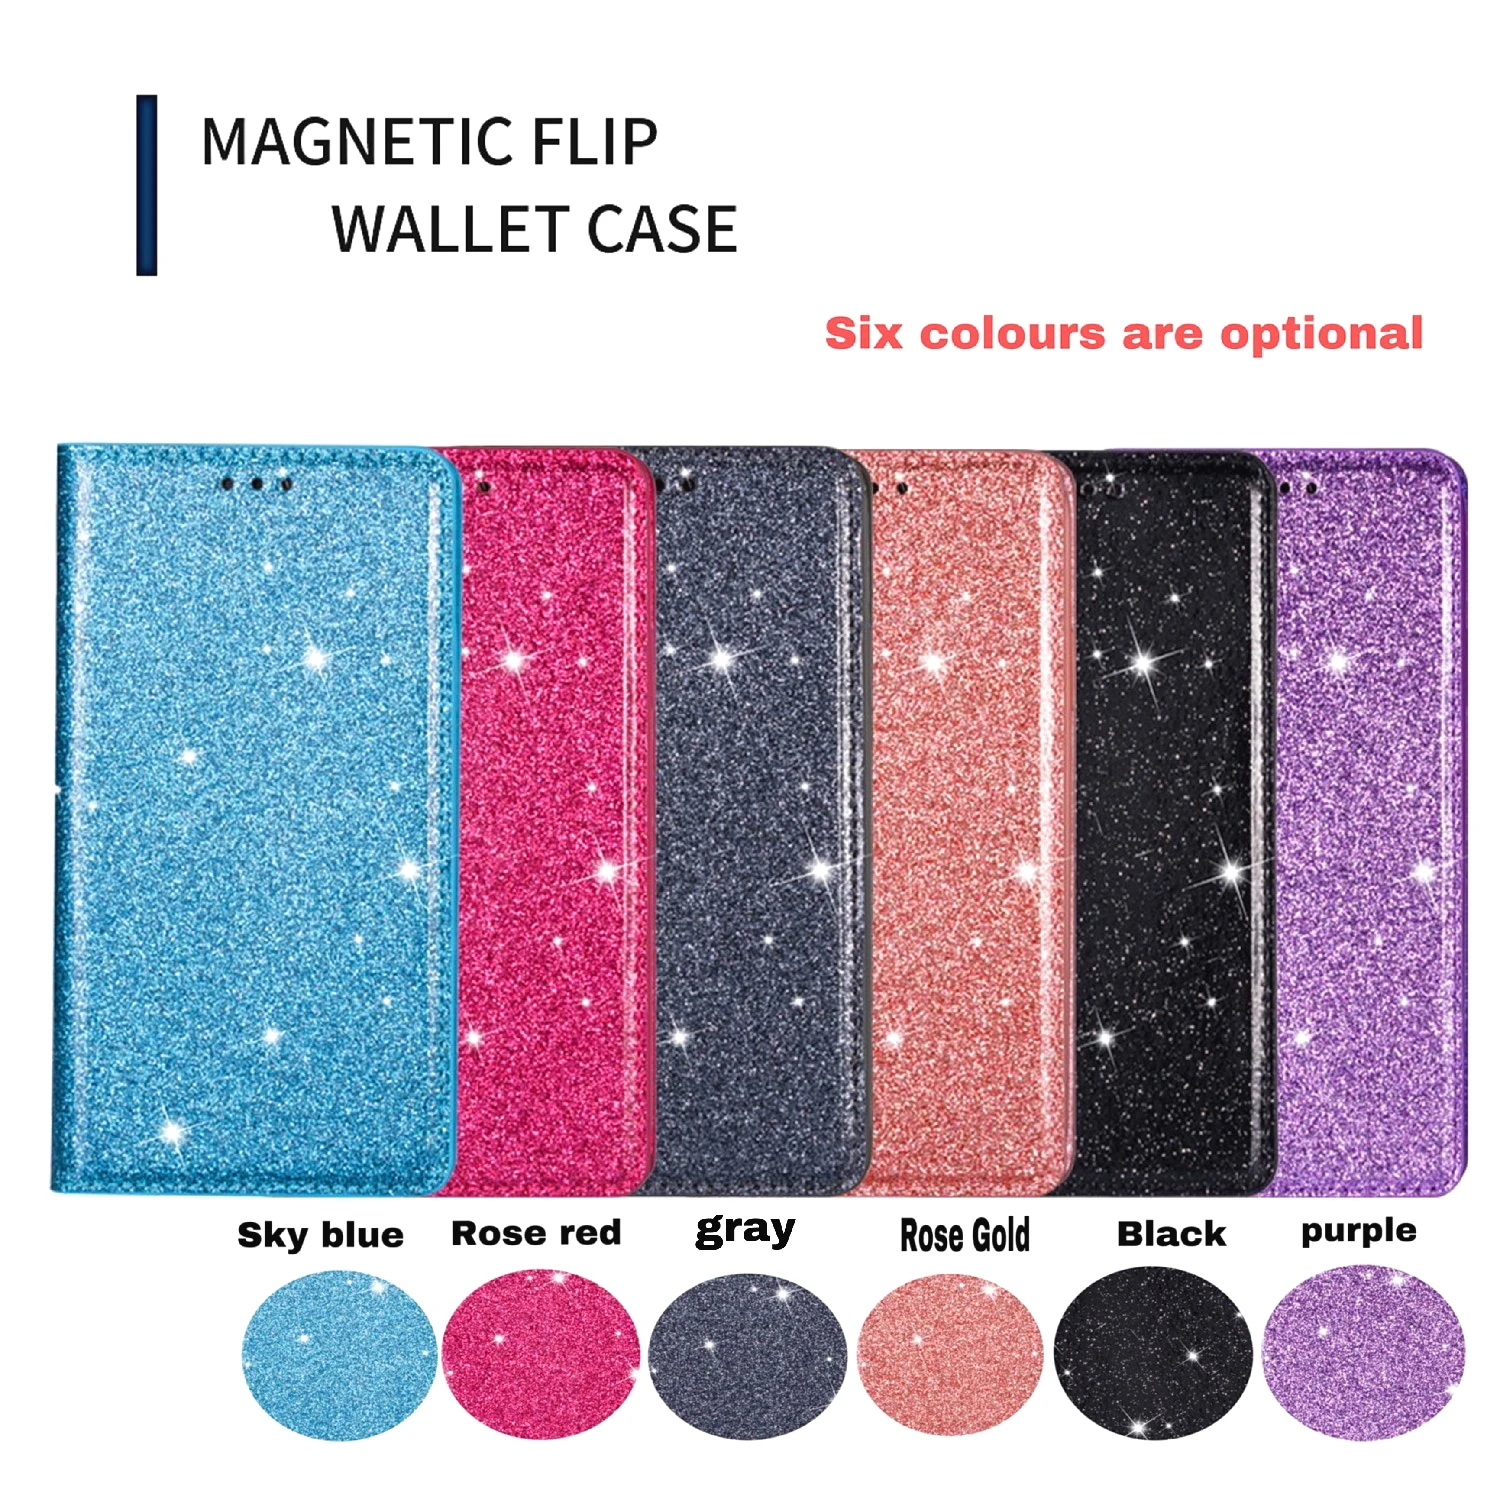 

100Pcs/Lot Wallet Case For Samsung S22 Plus S21 S20 FE Note 20 Ultra S10E S9 A23 F23 M23 Leather Glitter Flip Card Stand Cover